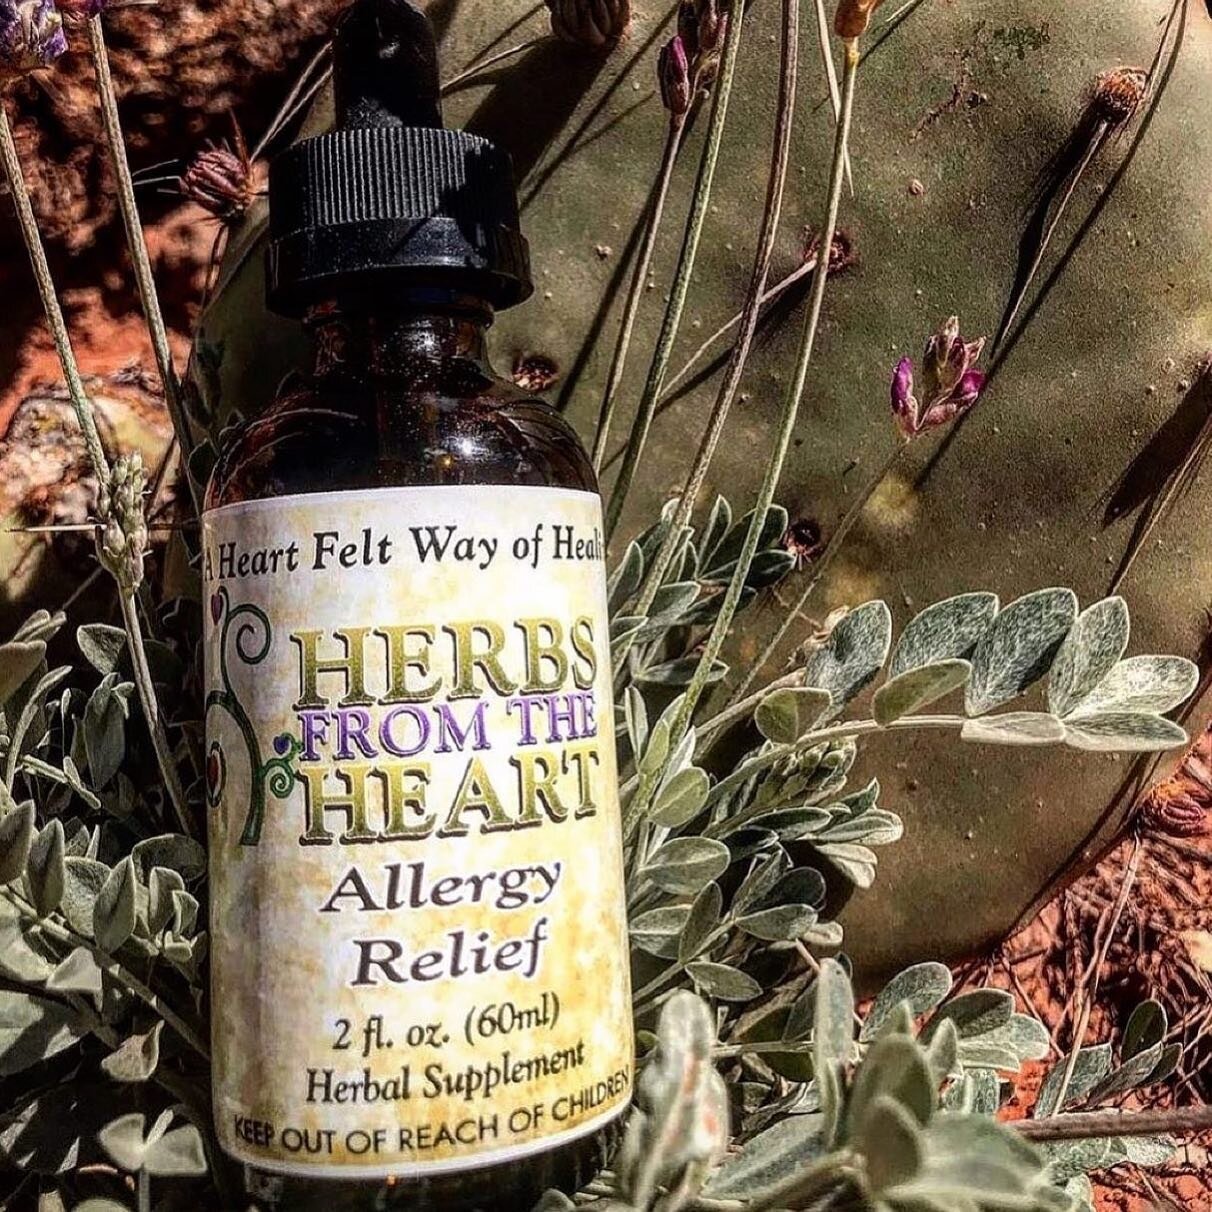 🤧 Allergy Relief 🥲 

Ohhh! 🤧 Those Allergies!  I&rsquo;ve got just the remedy for you during this Allergy season. 
🍃 
Allergy Relief is a Natural way to address Allergy symptoms while building and supporting the adrenals, liver and immune system.